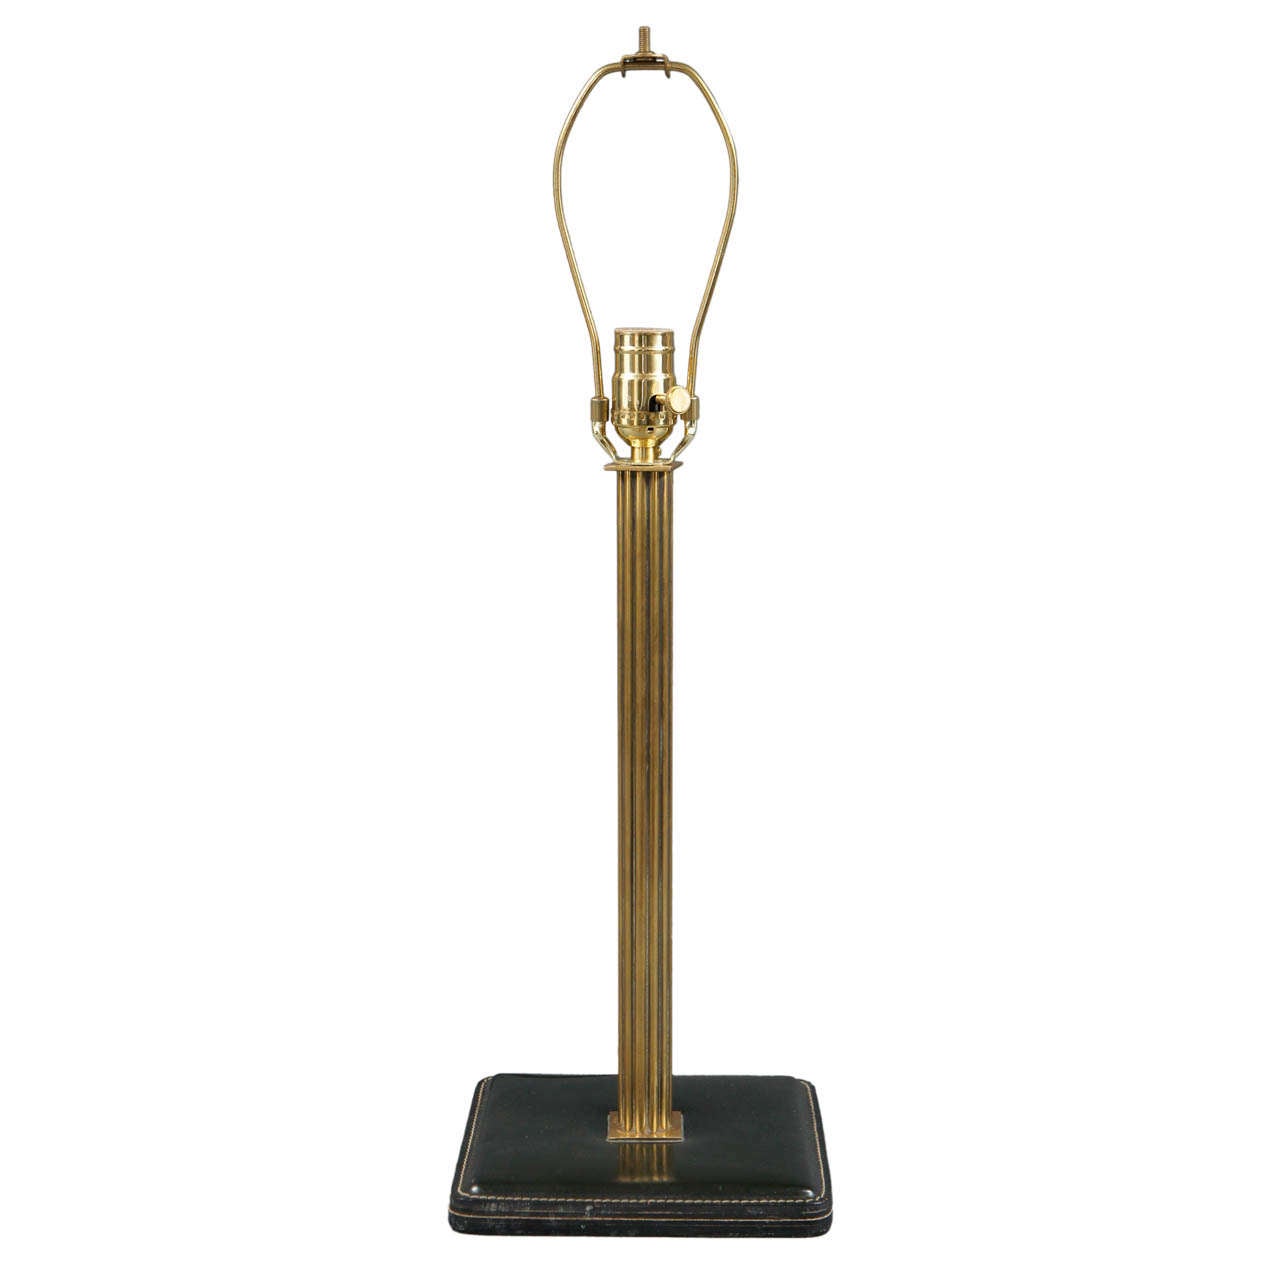 Single Table Lamp with Brass Column and Black Leather Base